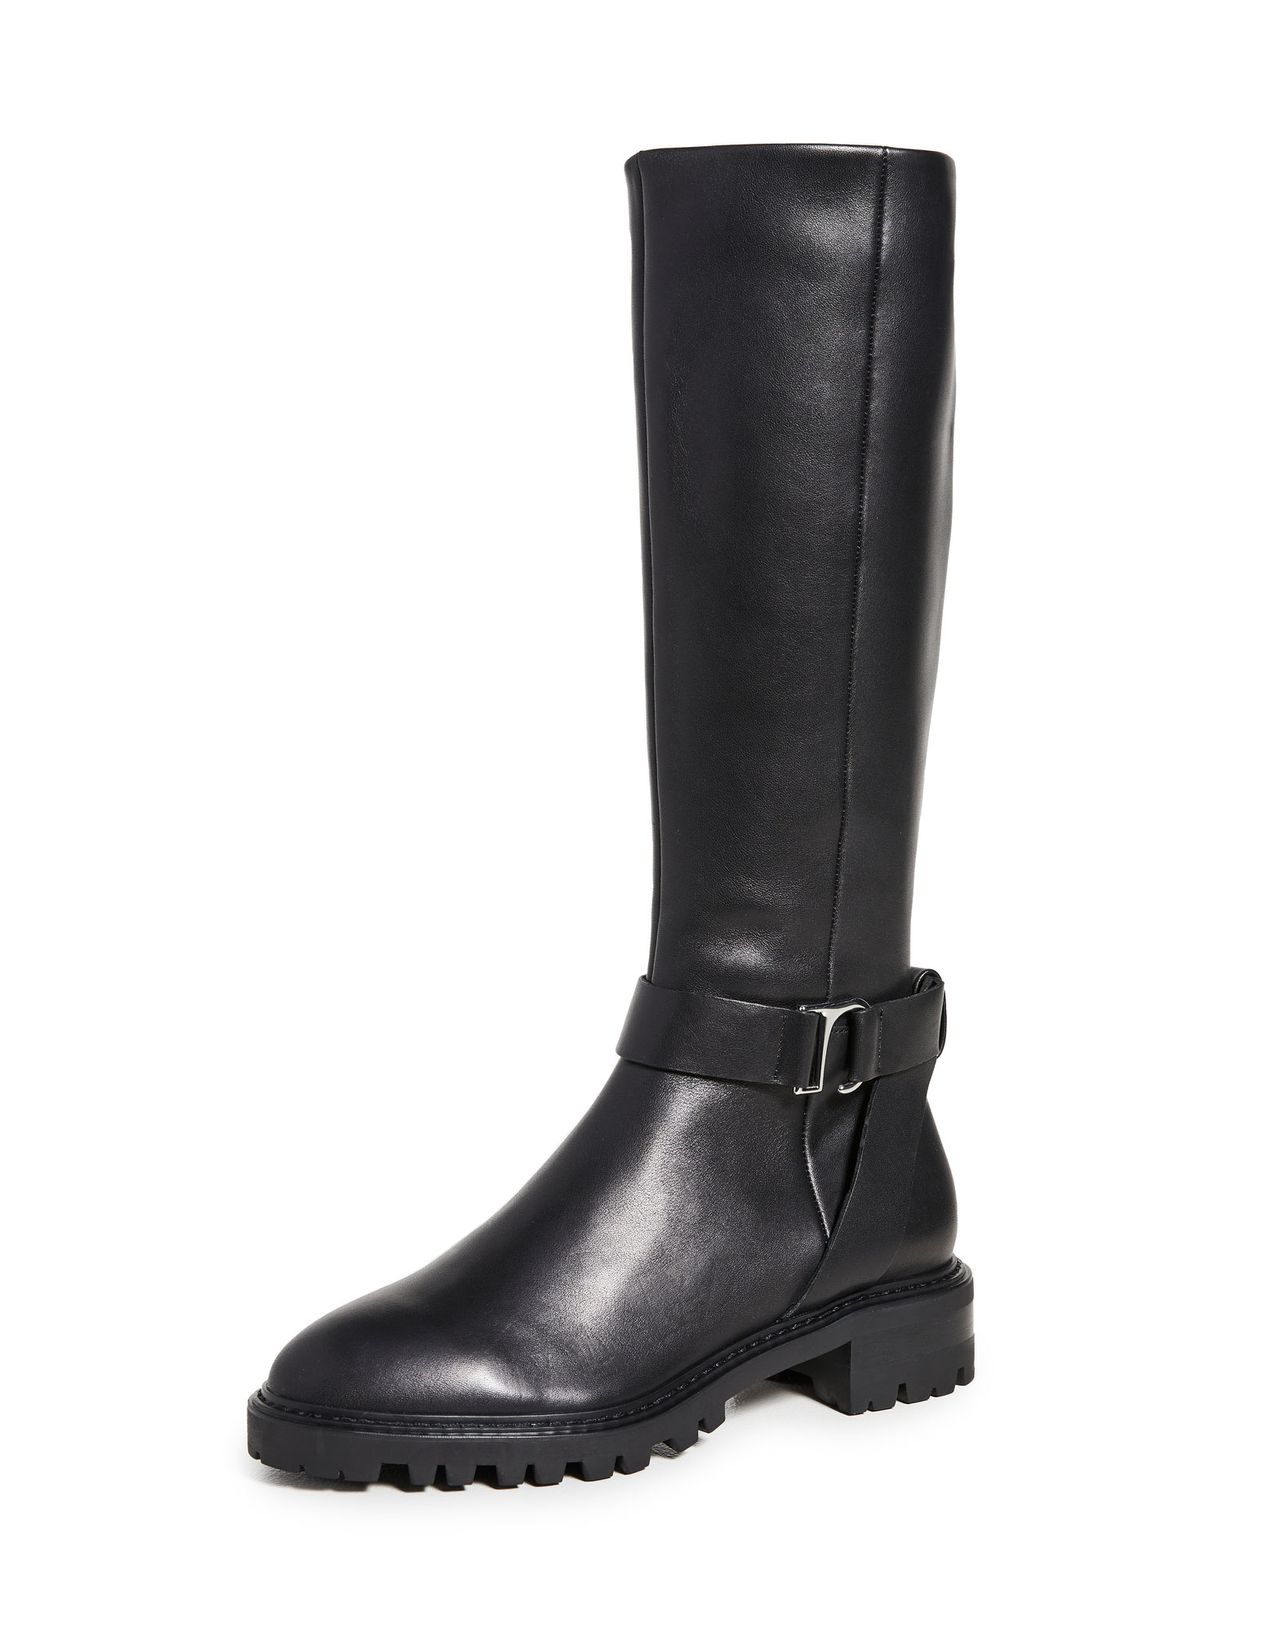 39 New Knee-High Boots to Wear With Skinny Jeans | Who What Wear